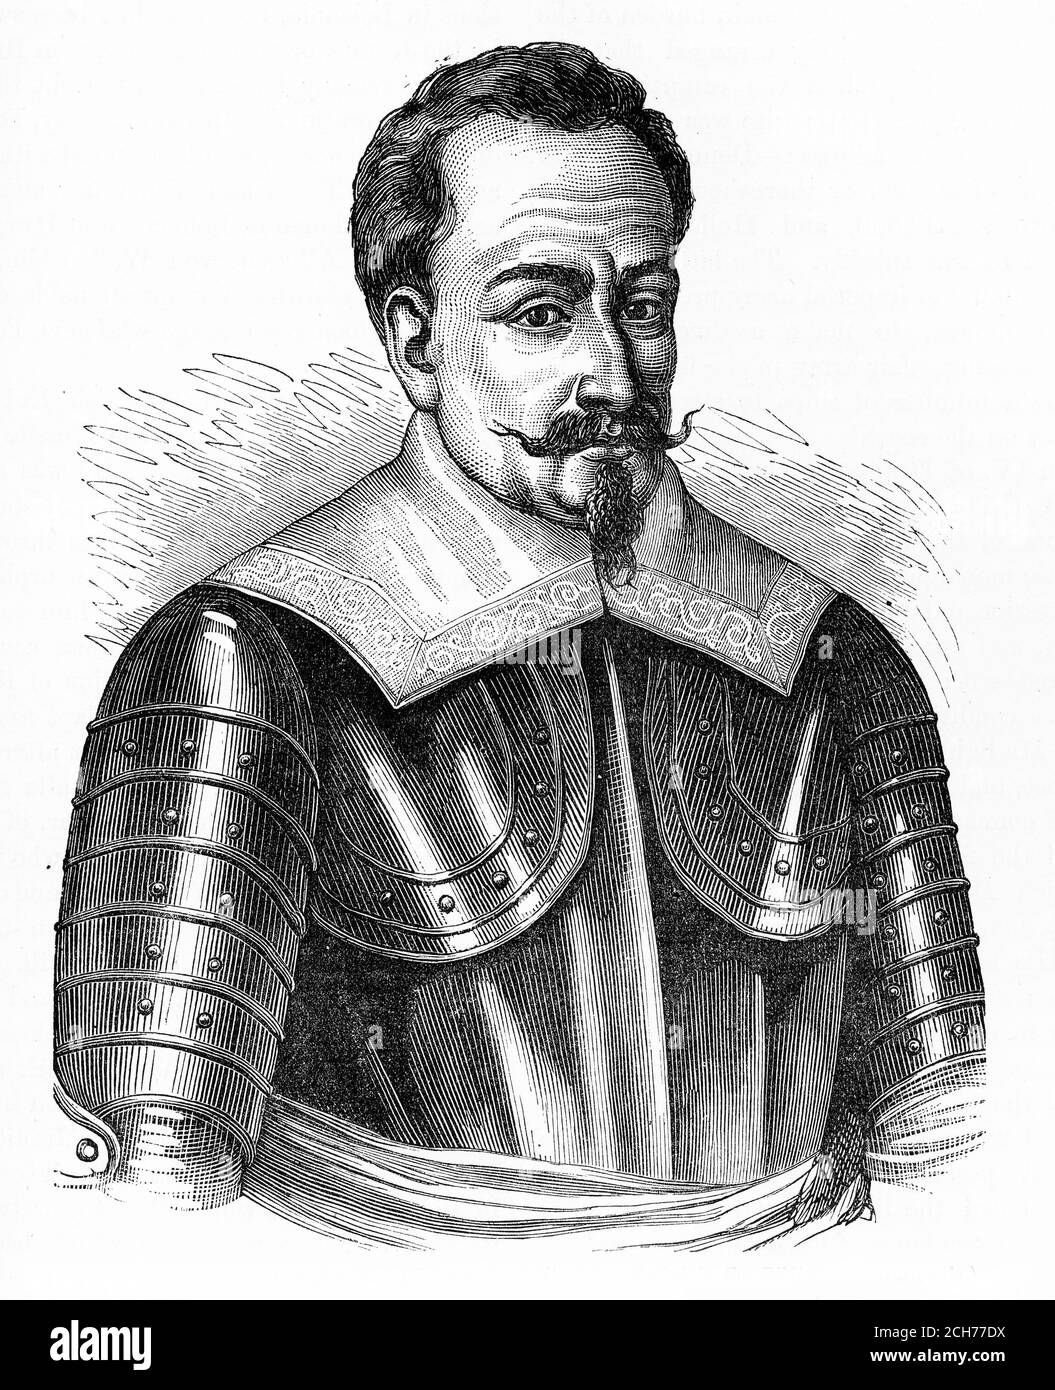 Engraving of Albrecht Wenzel Eusebius von Wallenstein (1583 – 1634), Bohemian military leader and statesman who fought on the Catholic side during the Thirty Years' War (1618–1648). His successful martial career made him one of the richest and most influential men in the Holy Roman Empire by the time of his death. Illustration from 'The history of Protestantism' by James Aitken Wylie (1808-1890), pub. 1878 Stock Photo